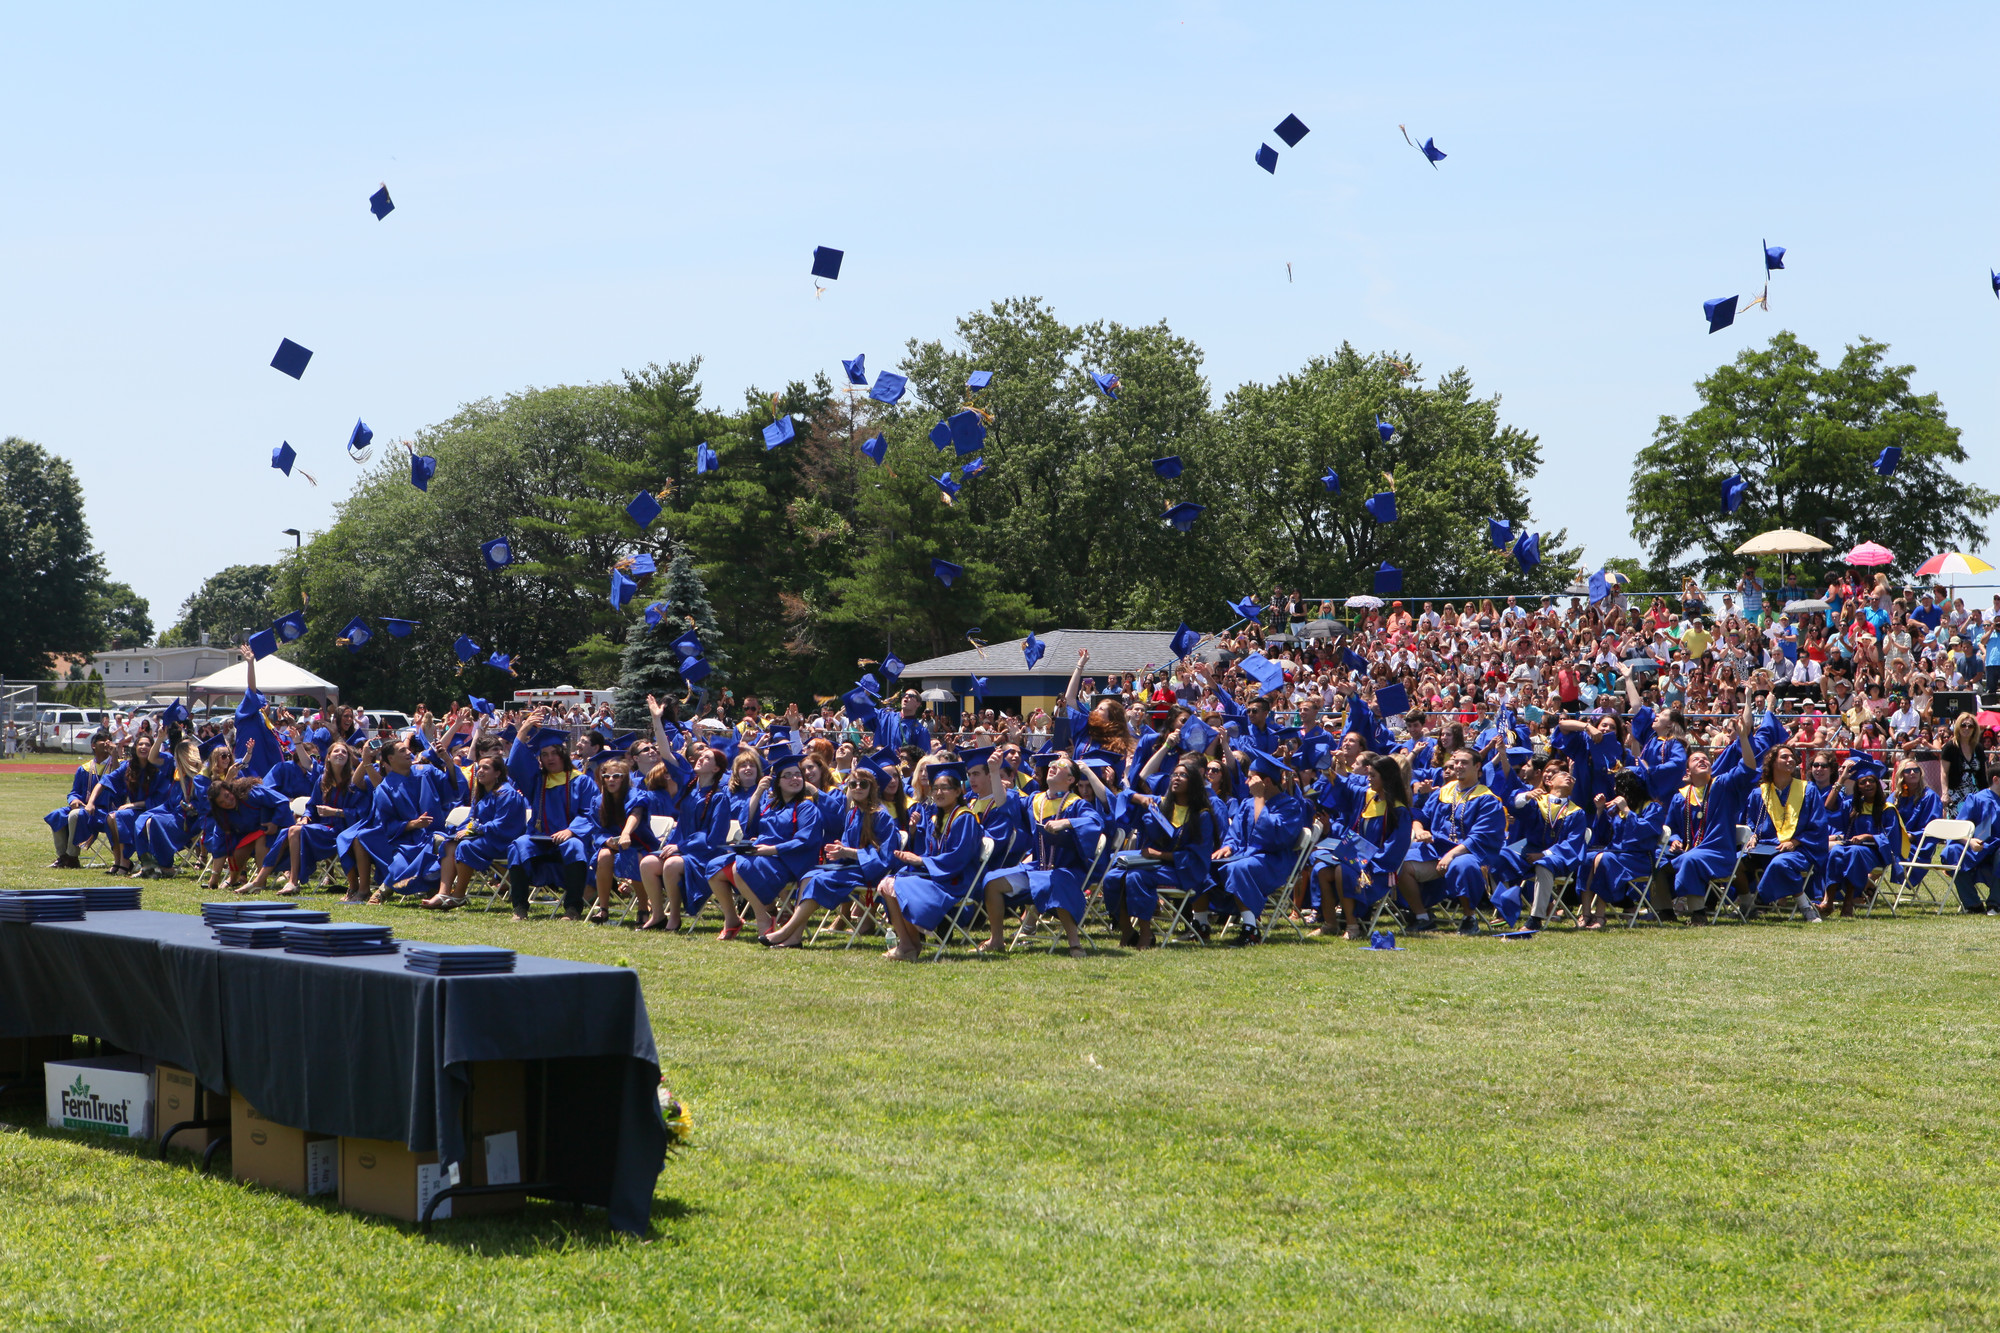 Students threw their caps in celebration as the East Meadow High School graduation ceremony concluded on June 29.